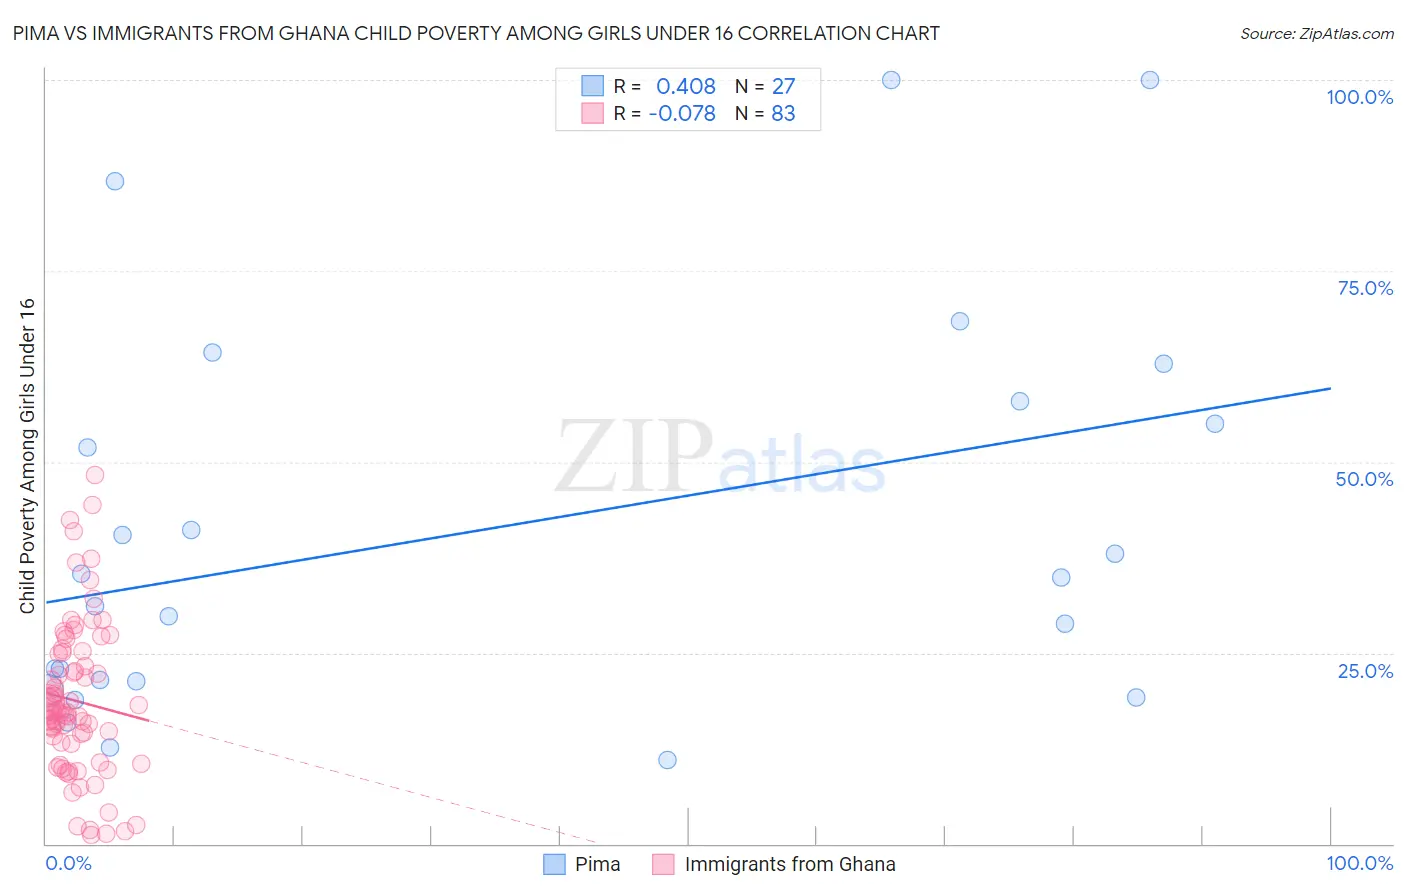 Pima vs Immigrants from Ghana Child Poverty Among Girls Under 16